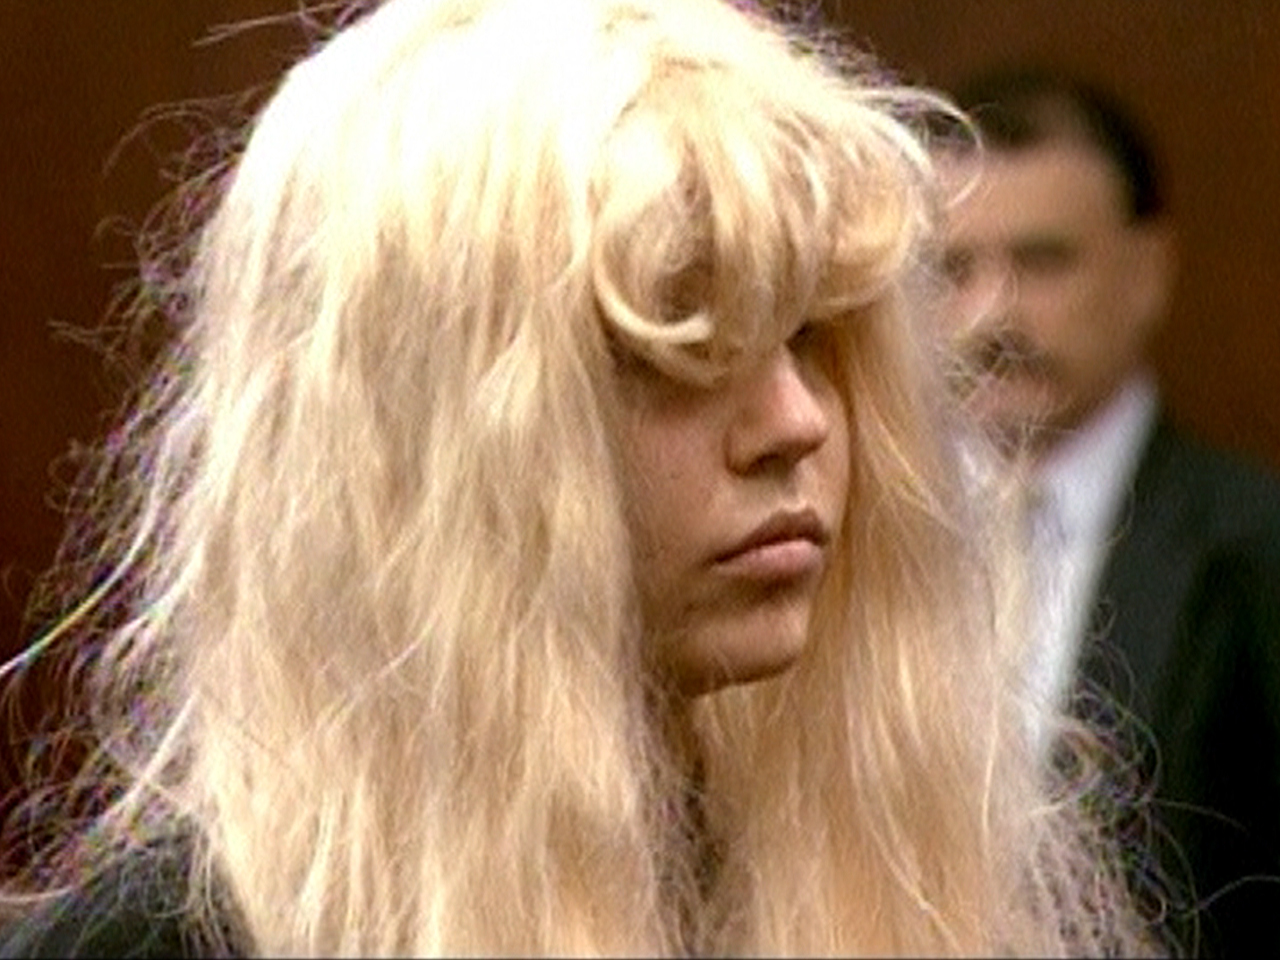 Amanda Bynes shows up to court in blonde wig - TODAY.com